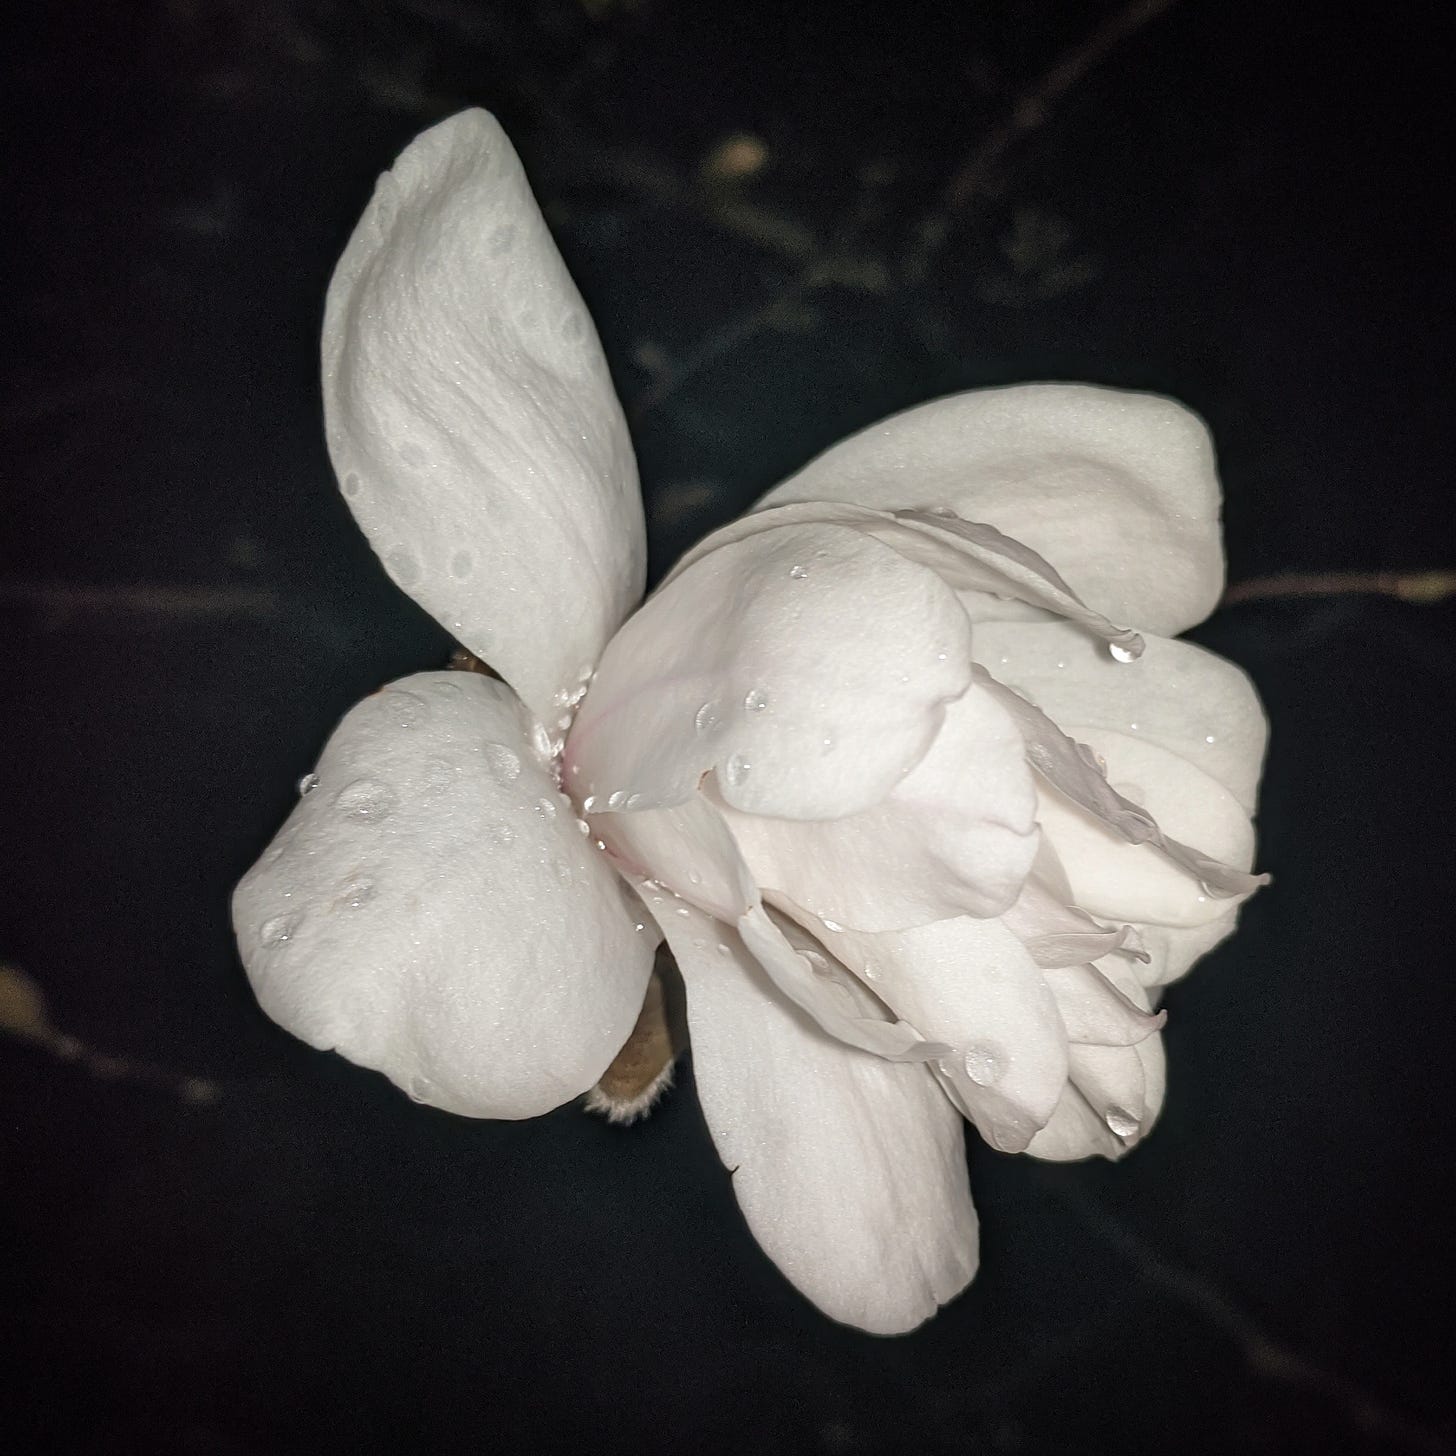 photo of white magnolia flower with dewdrops on petals and dark night background